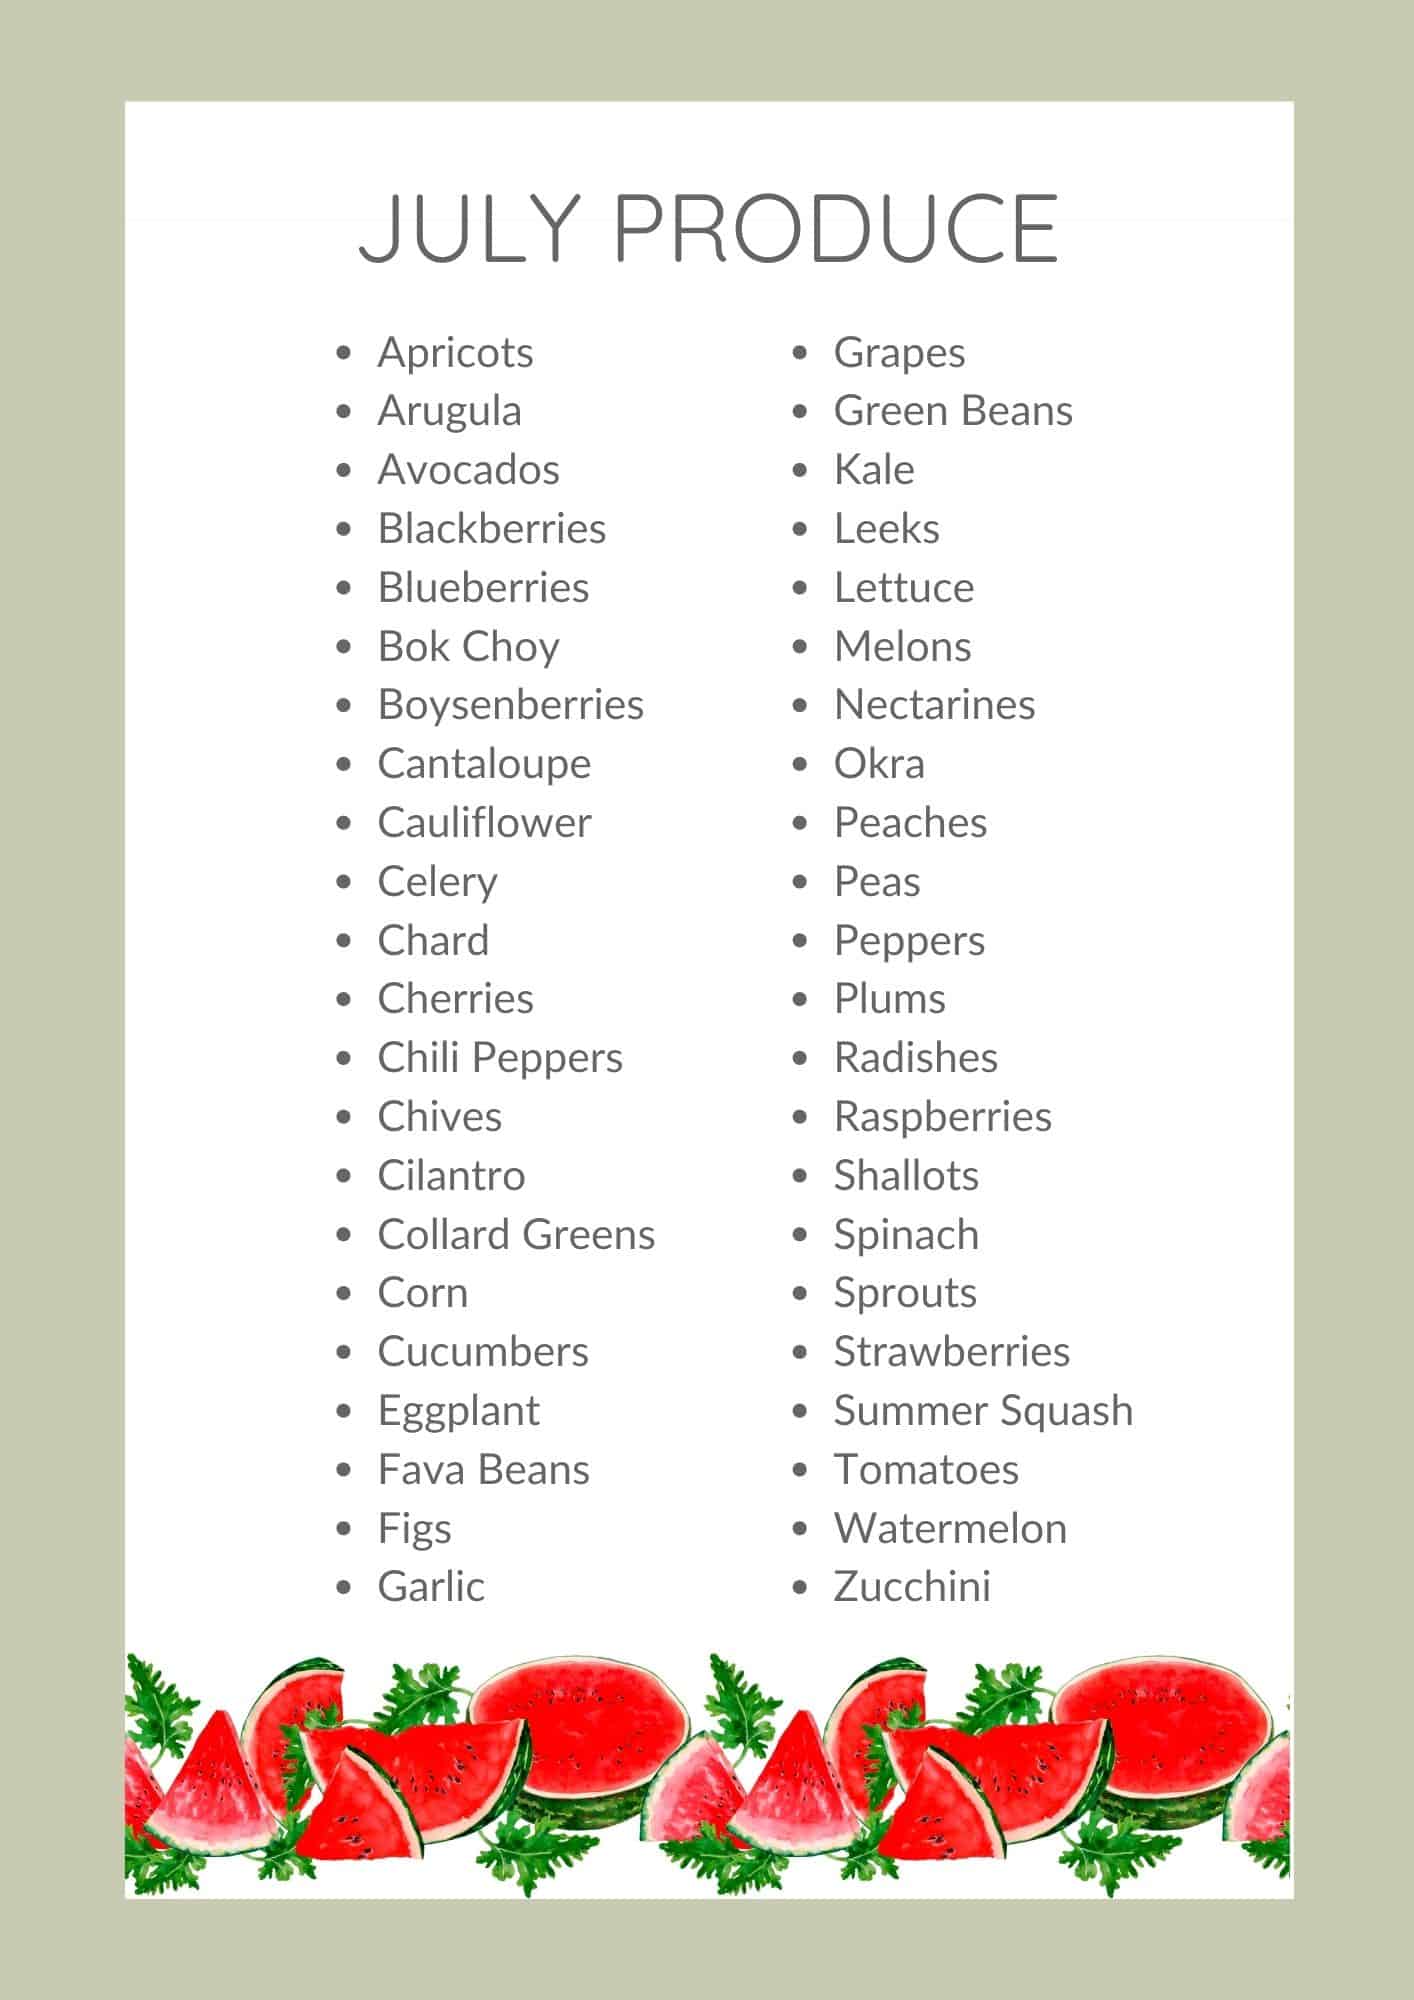 A graphic with July seasonal produce.